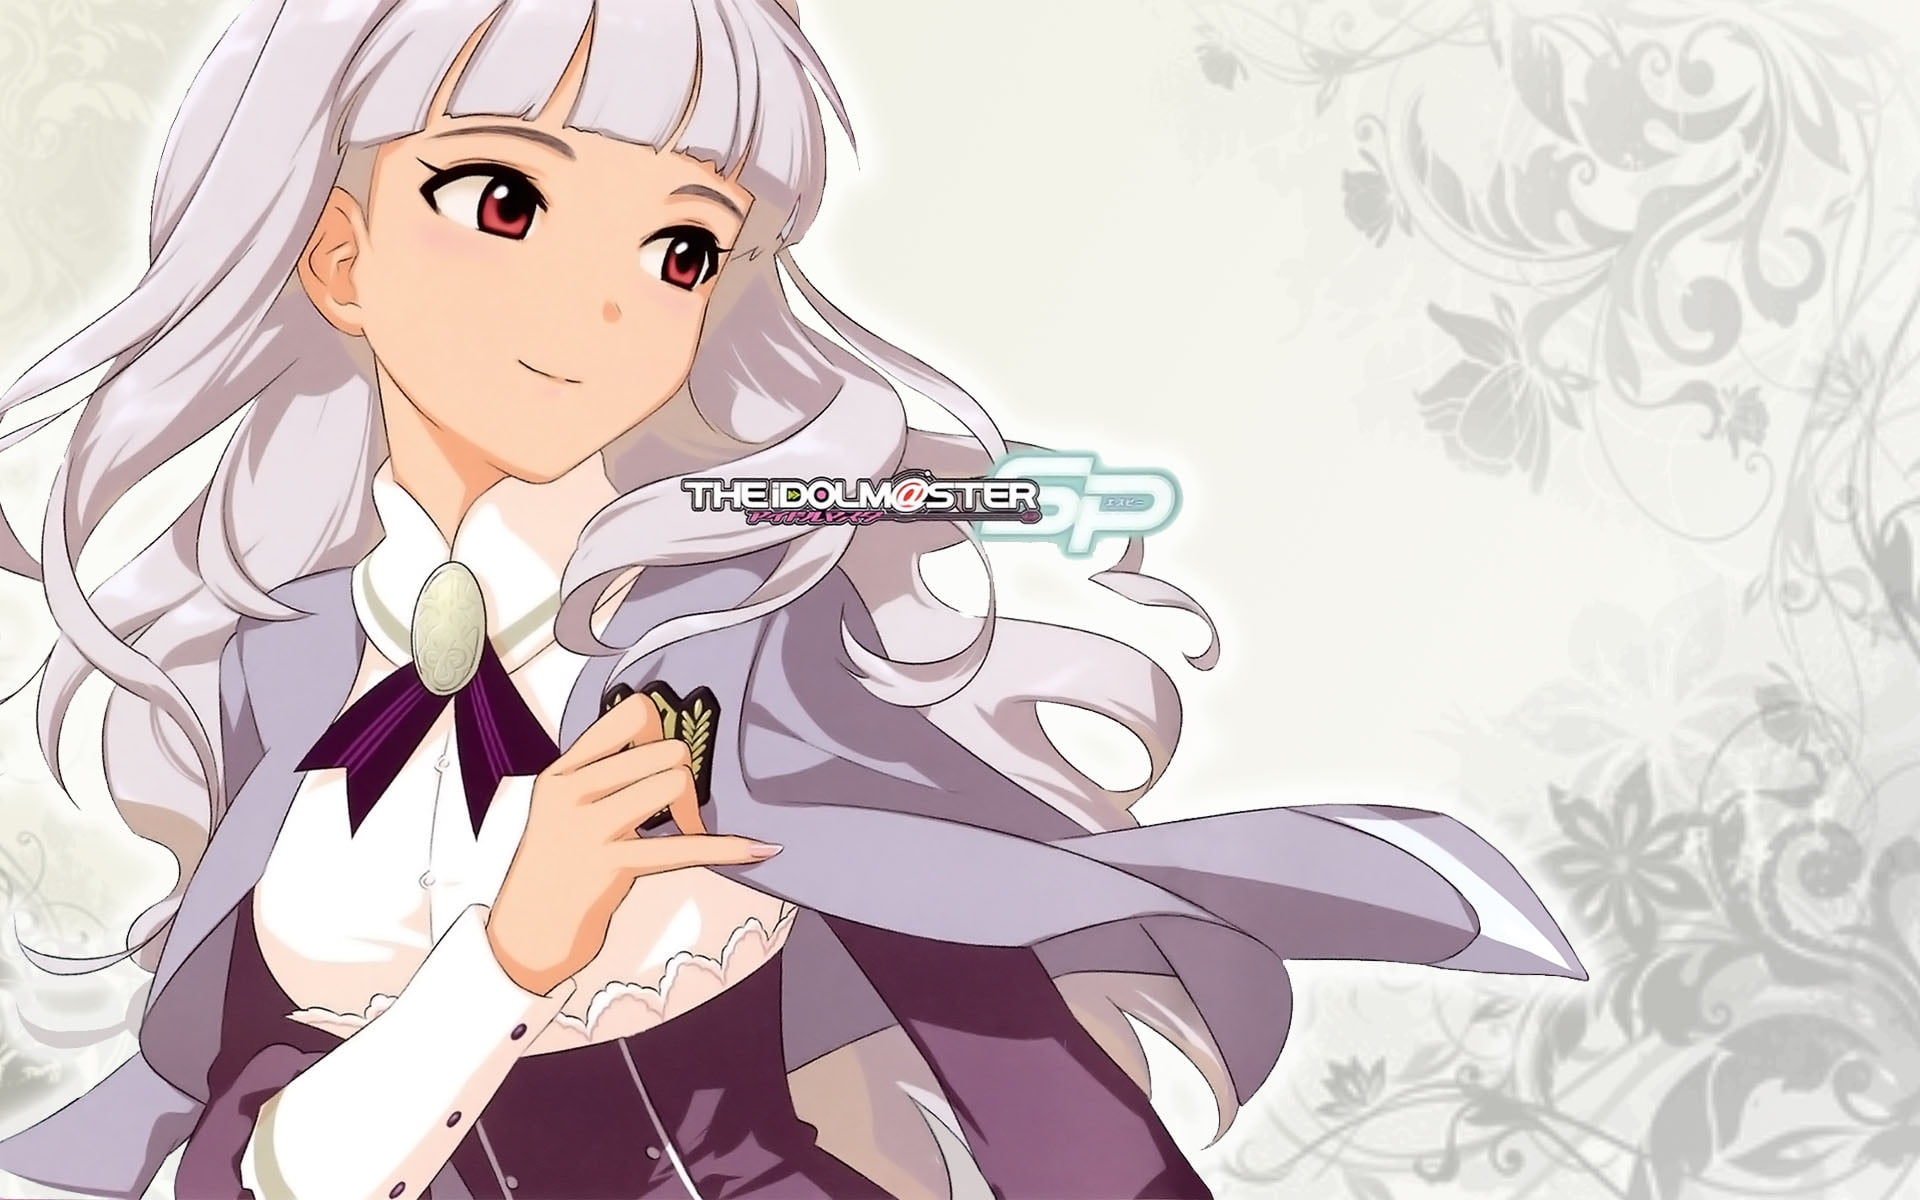 gray haired anime girl with white and gray clothes graphic illustration